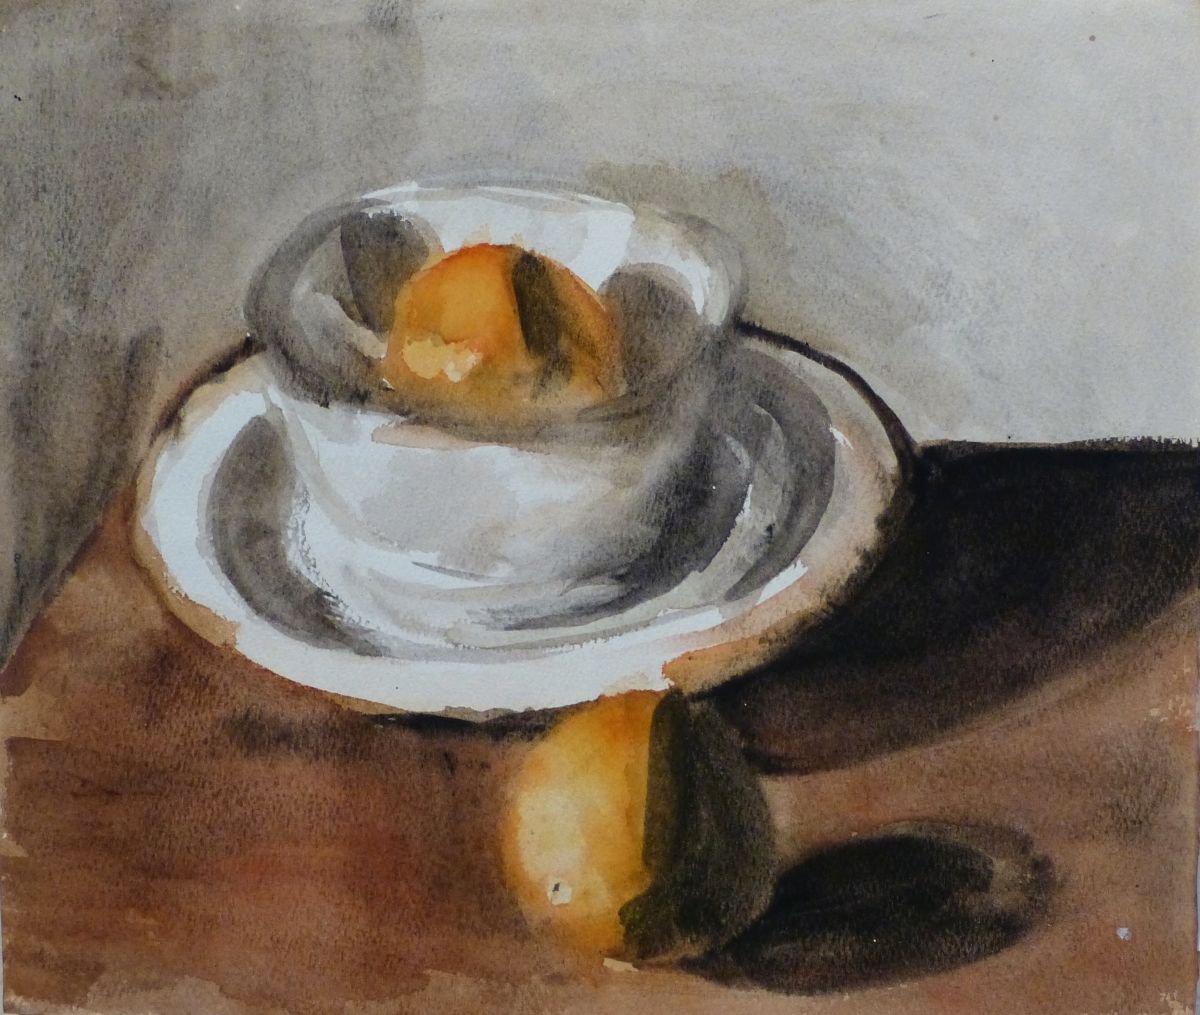 Still Life with A Bowl and Oranges, 31x27 cm by Frederic Belaubre